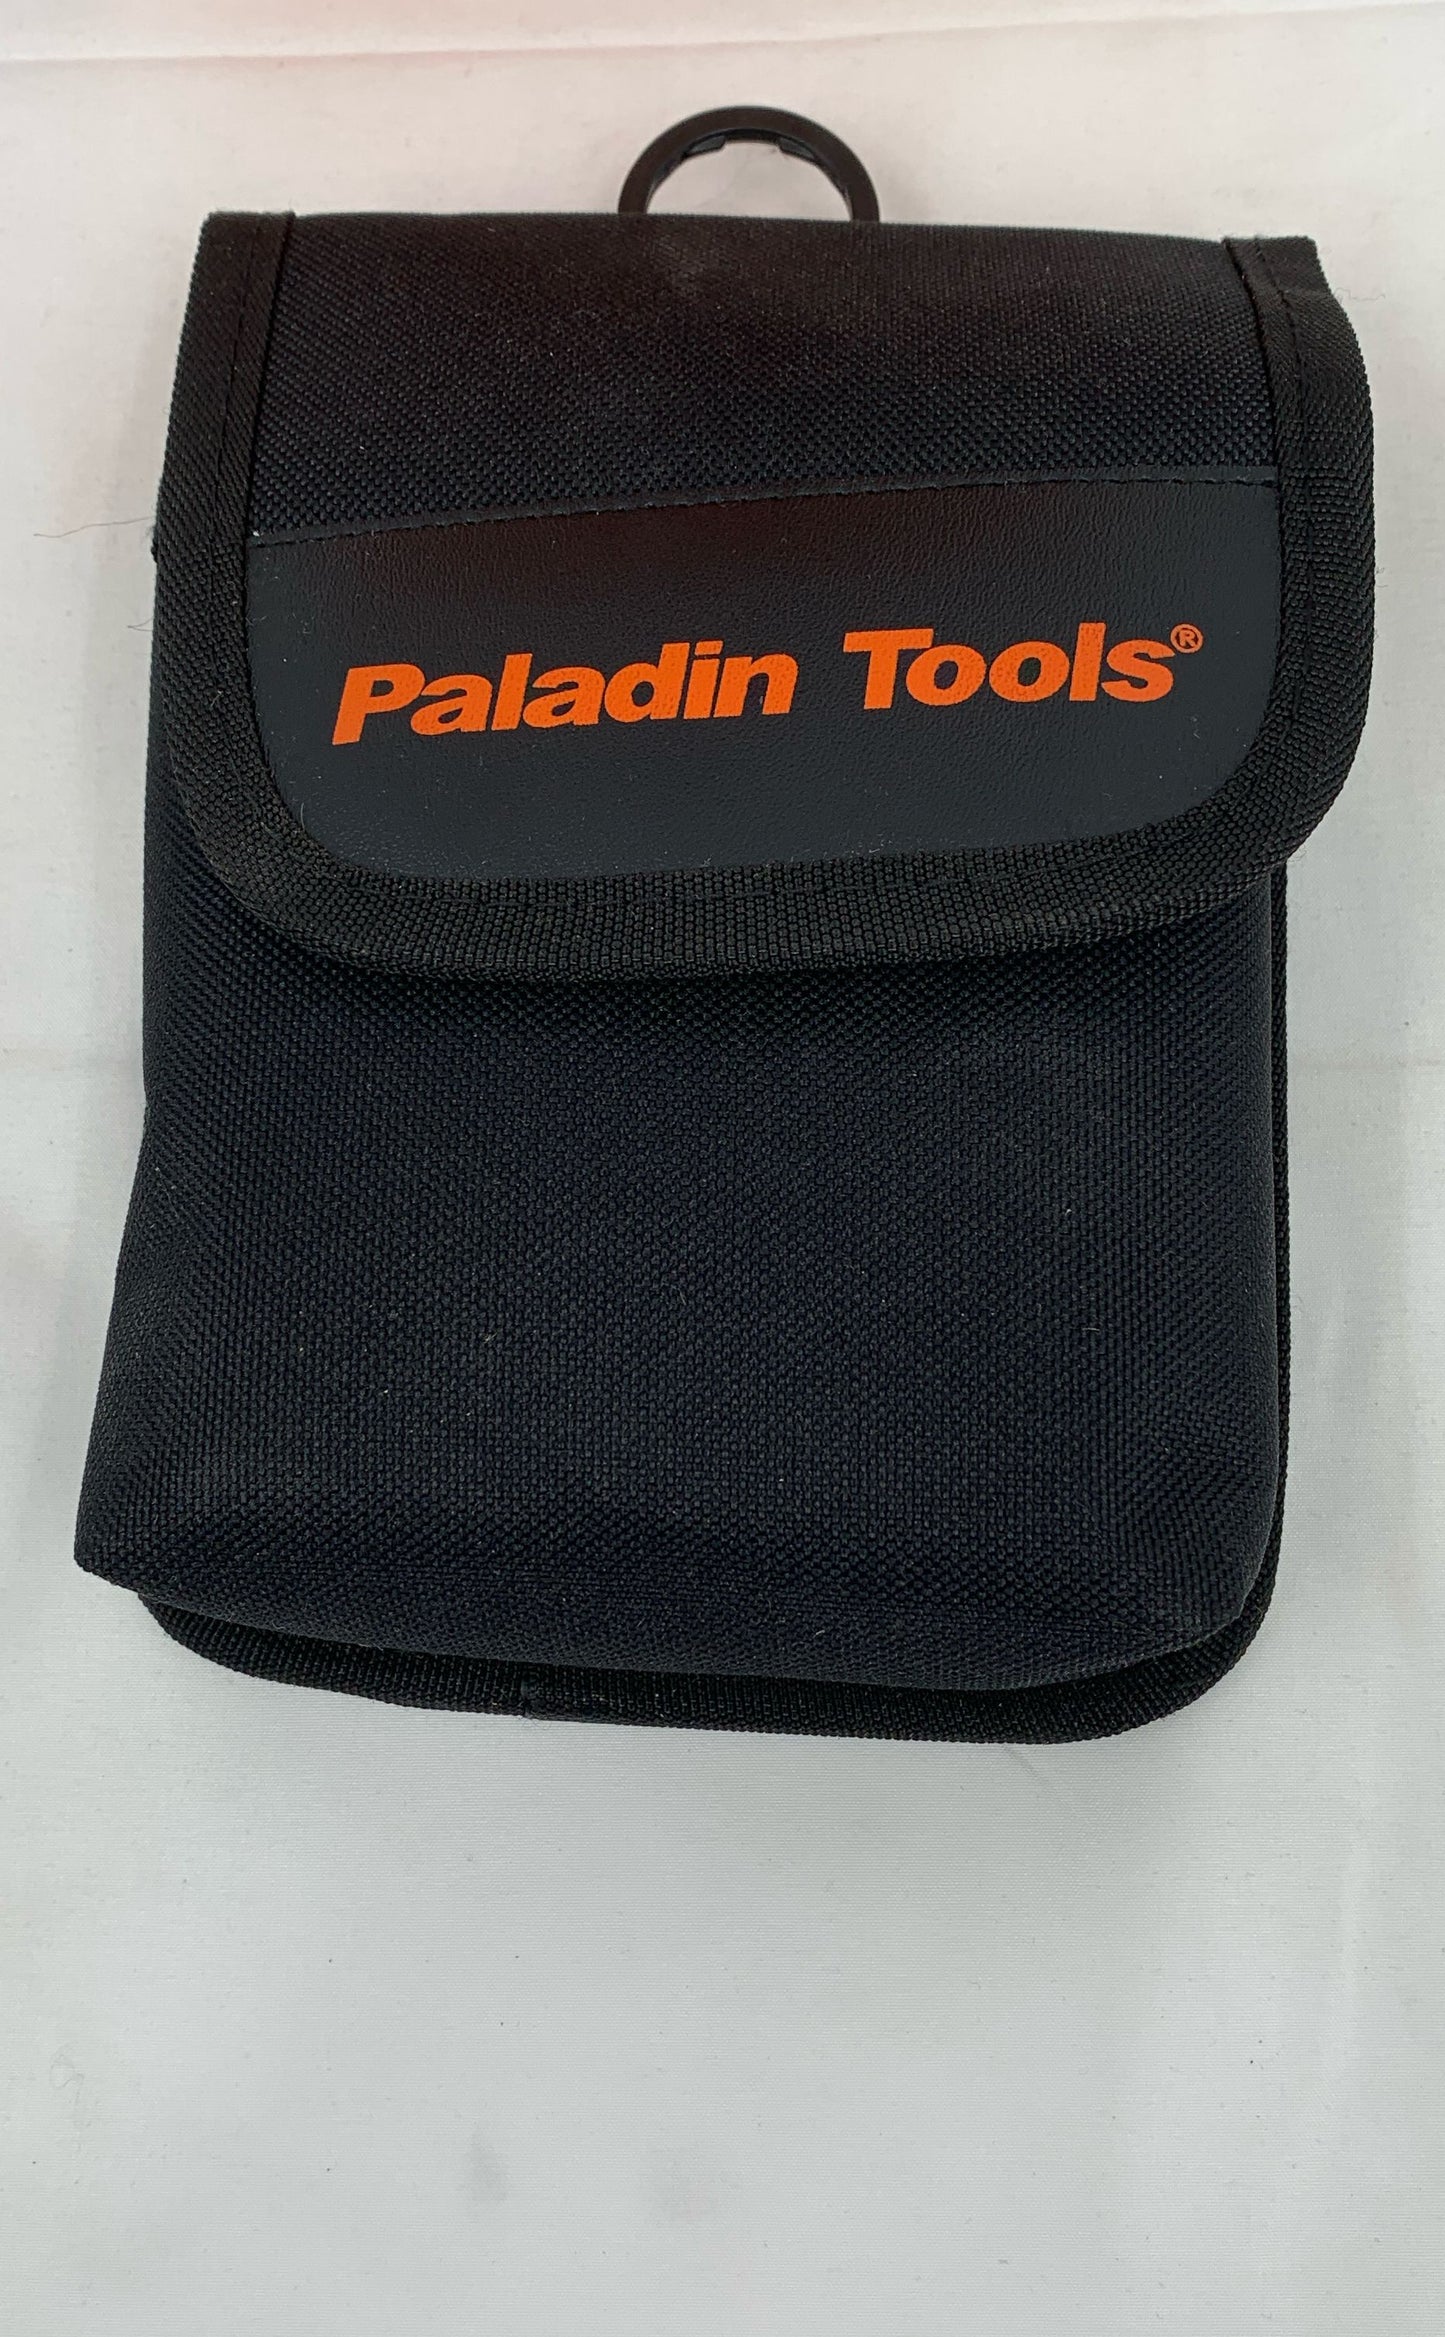 Paladin Tools LAN Cable-Check #1574 Network & Telephone Connection New Open Box